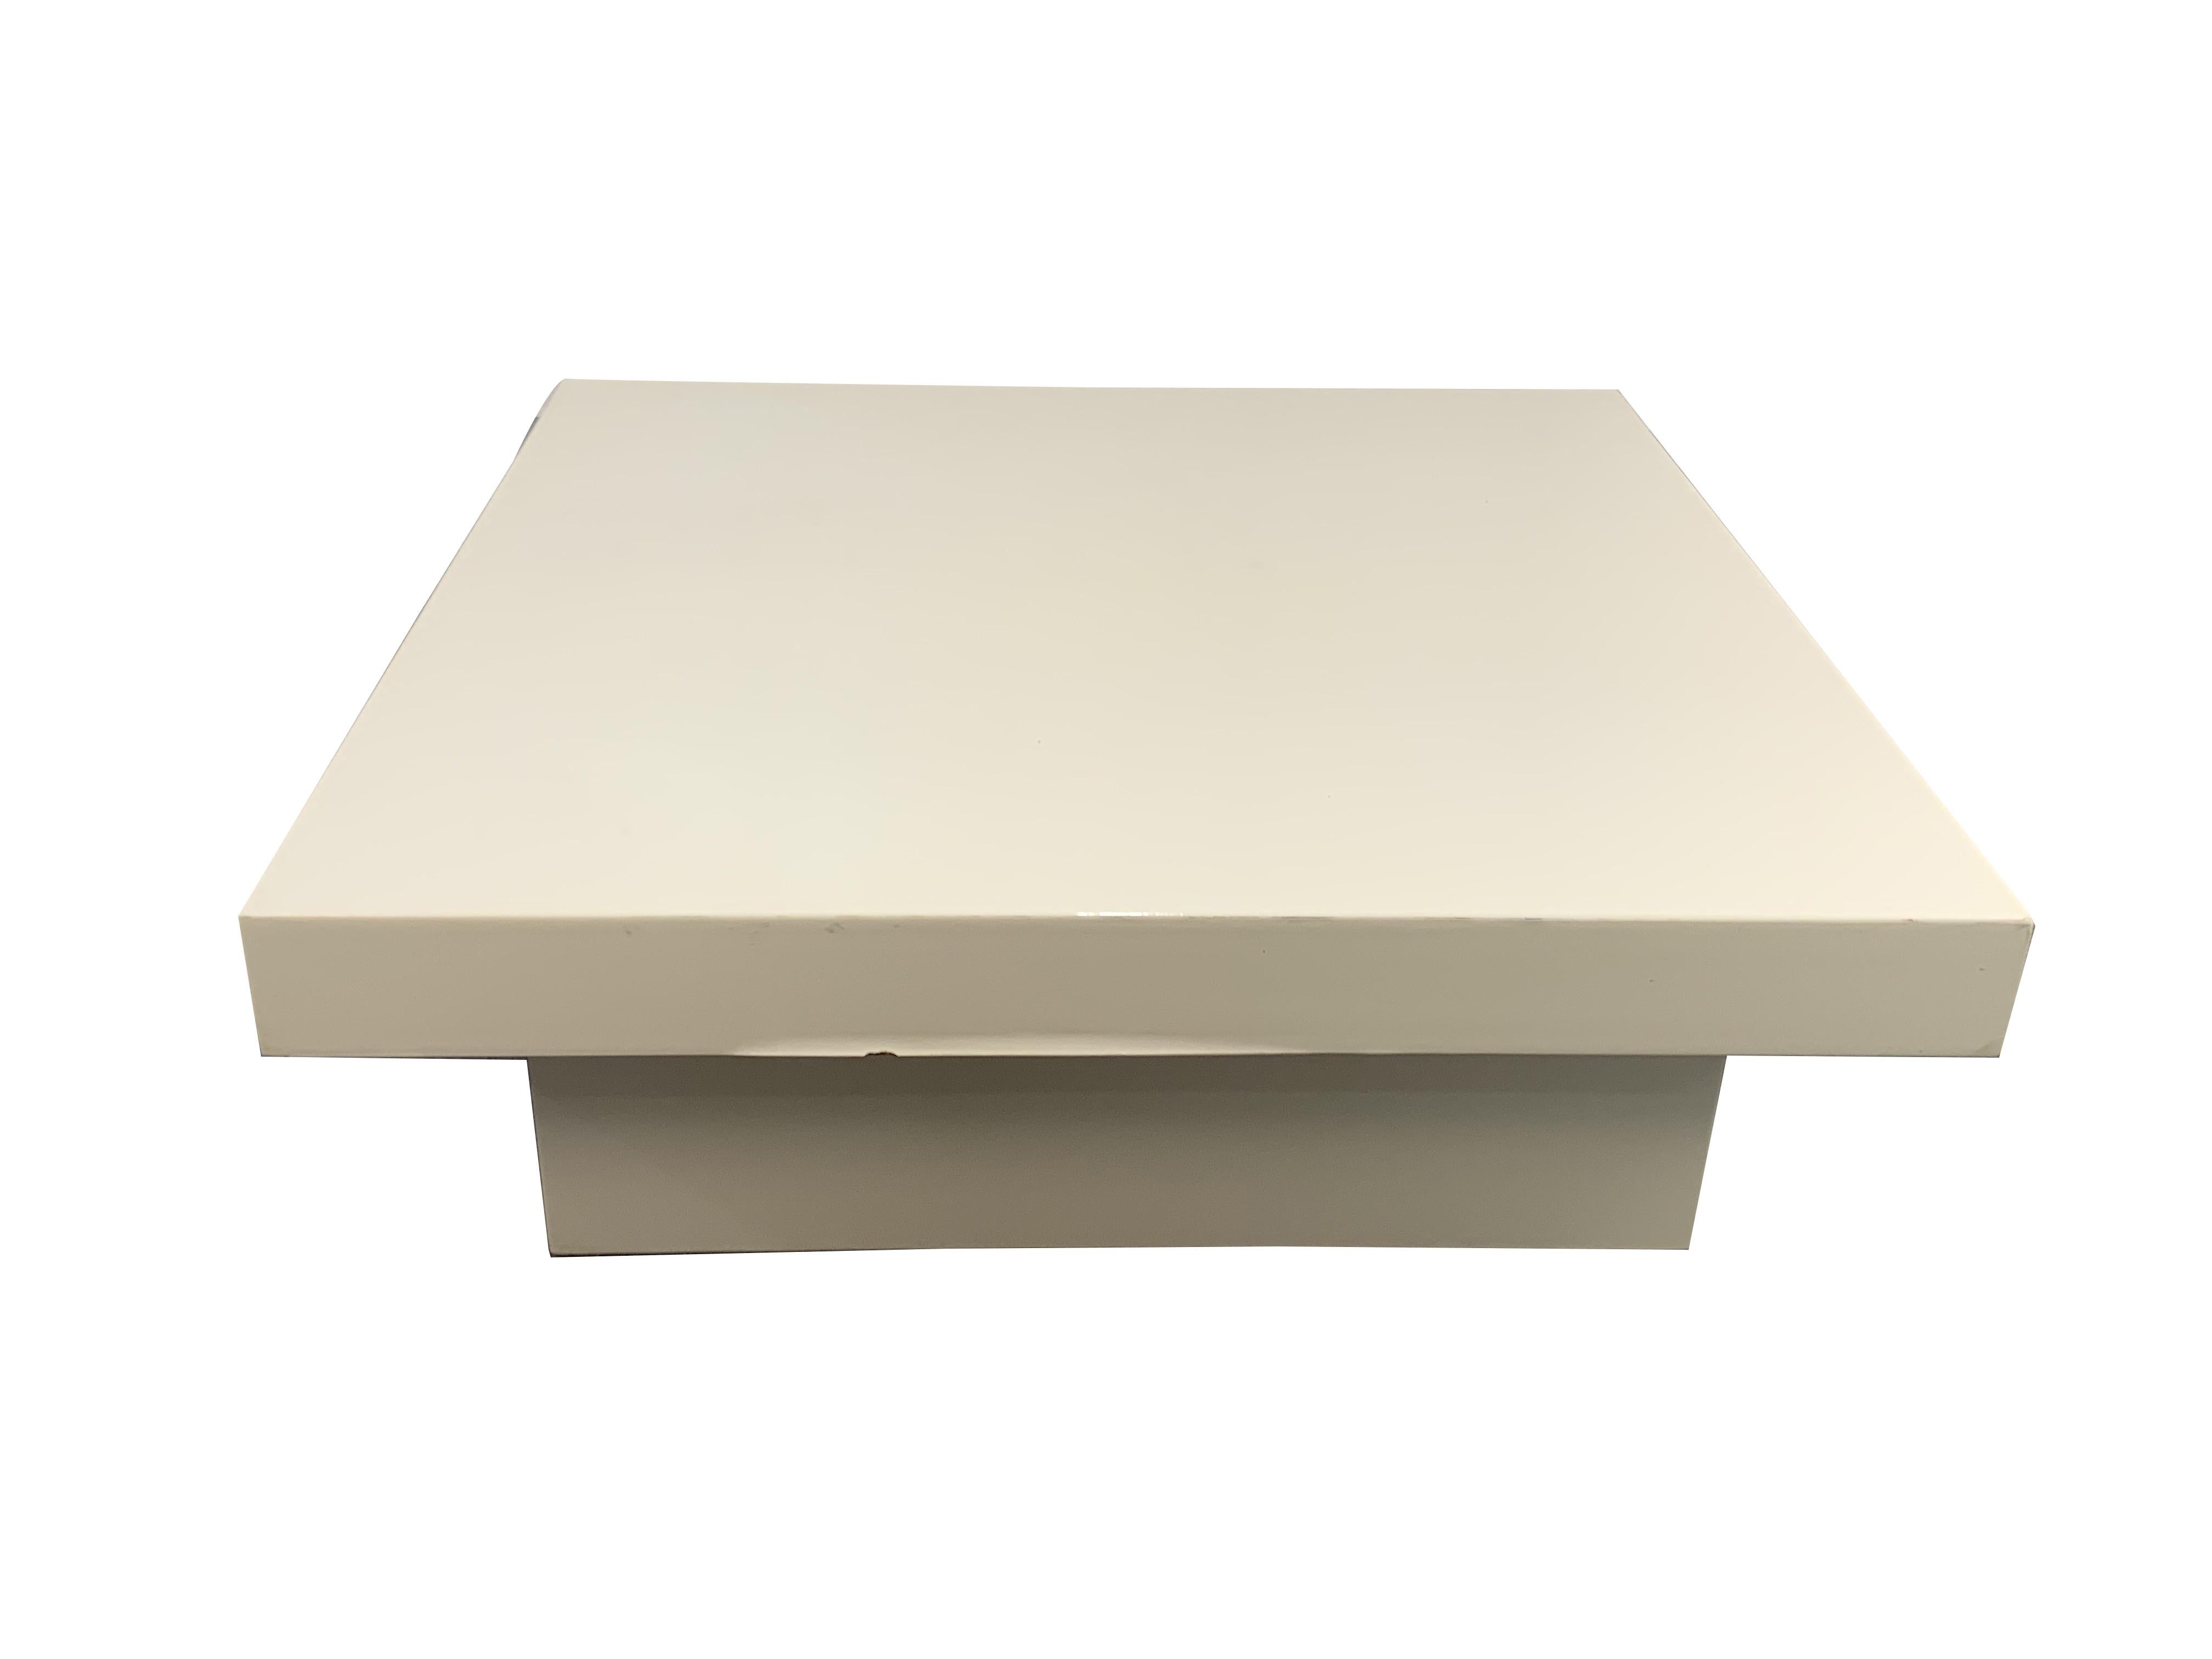 Late 20th Century Willy Rizzo Lacquered Ivory White Wood Squared Modern Italian Coffee Table 1980s